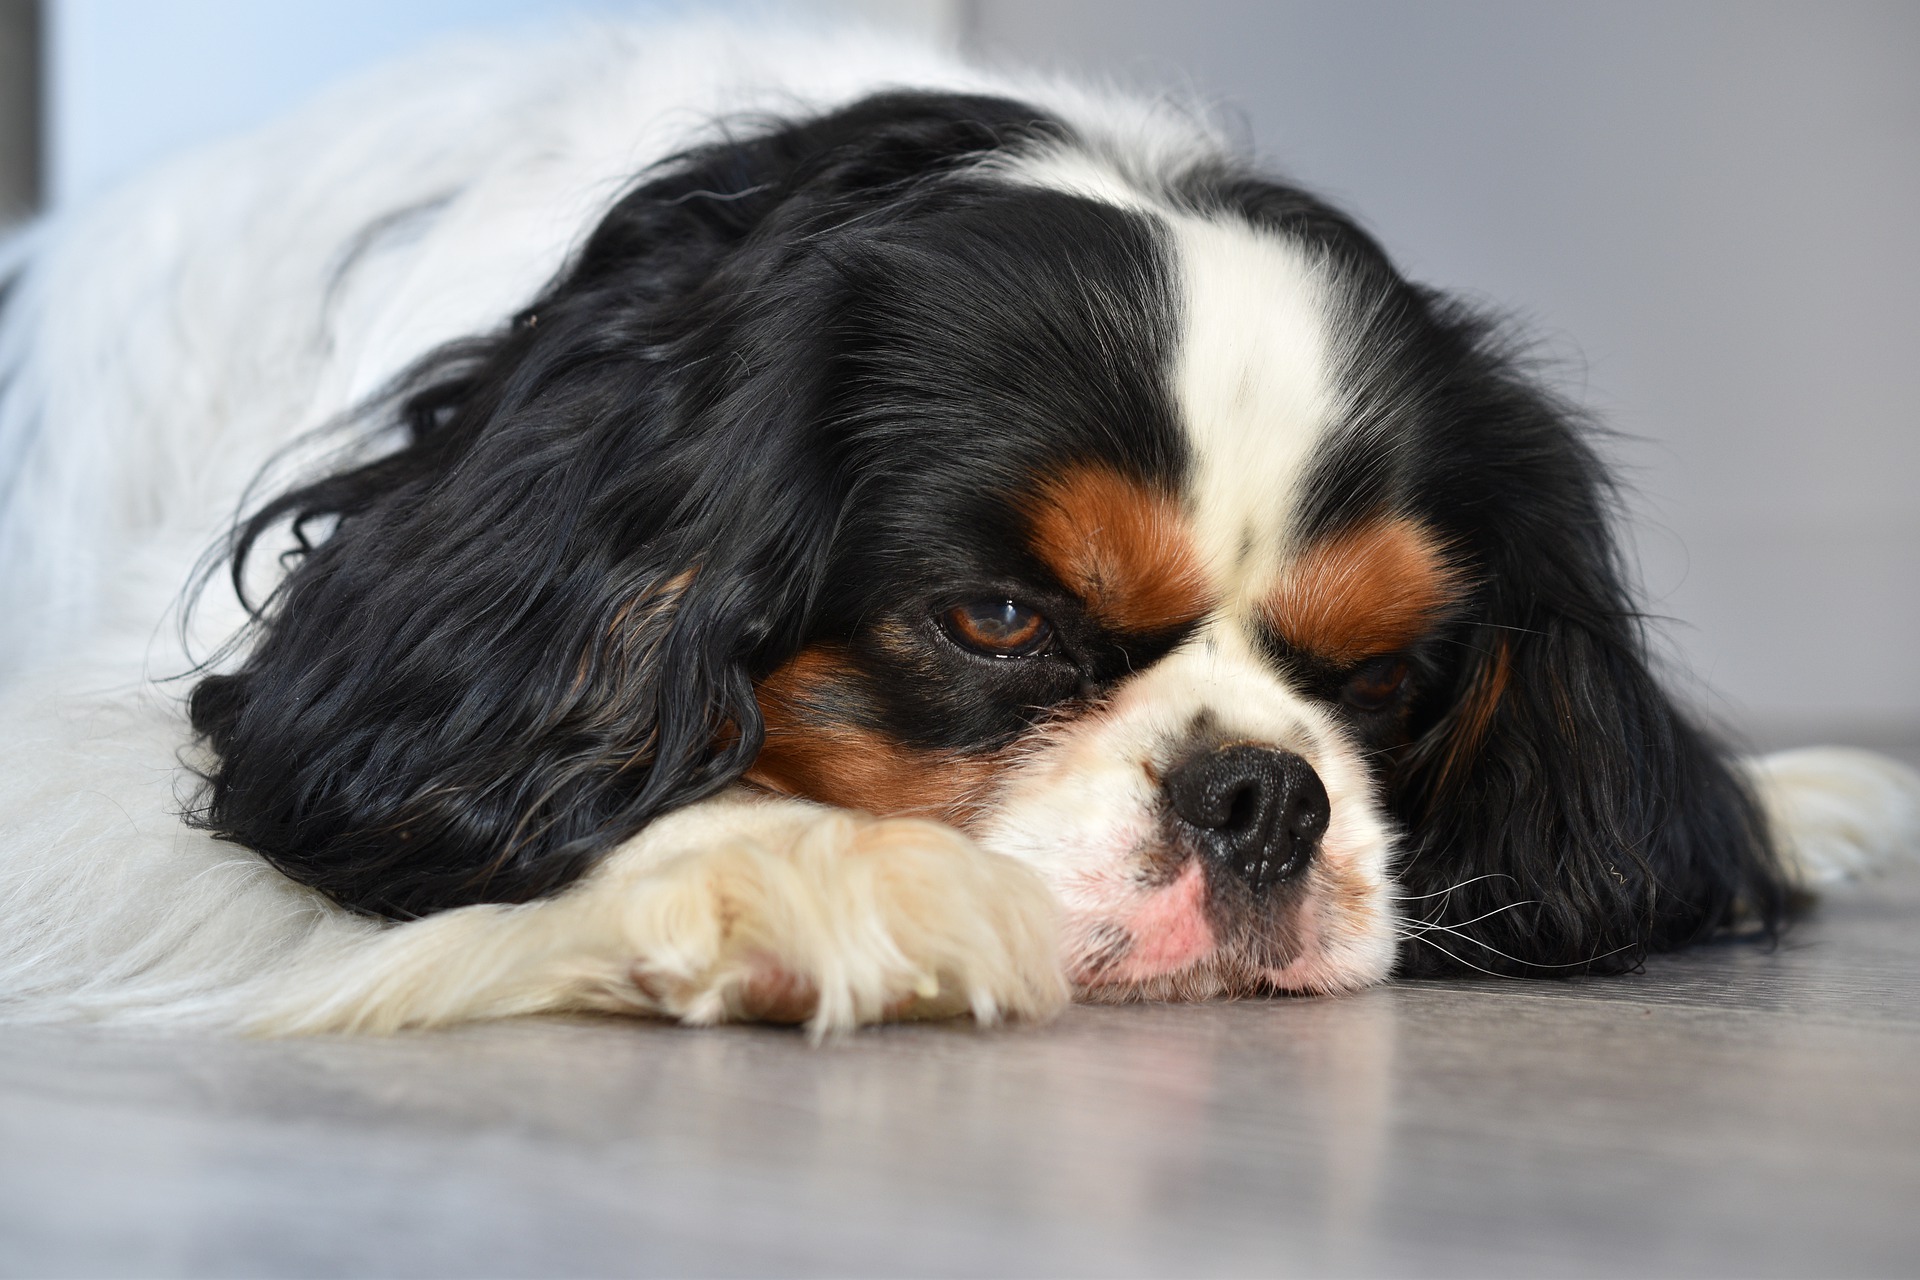 Signs of Depression in Dogs and How to Treat It